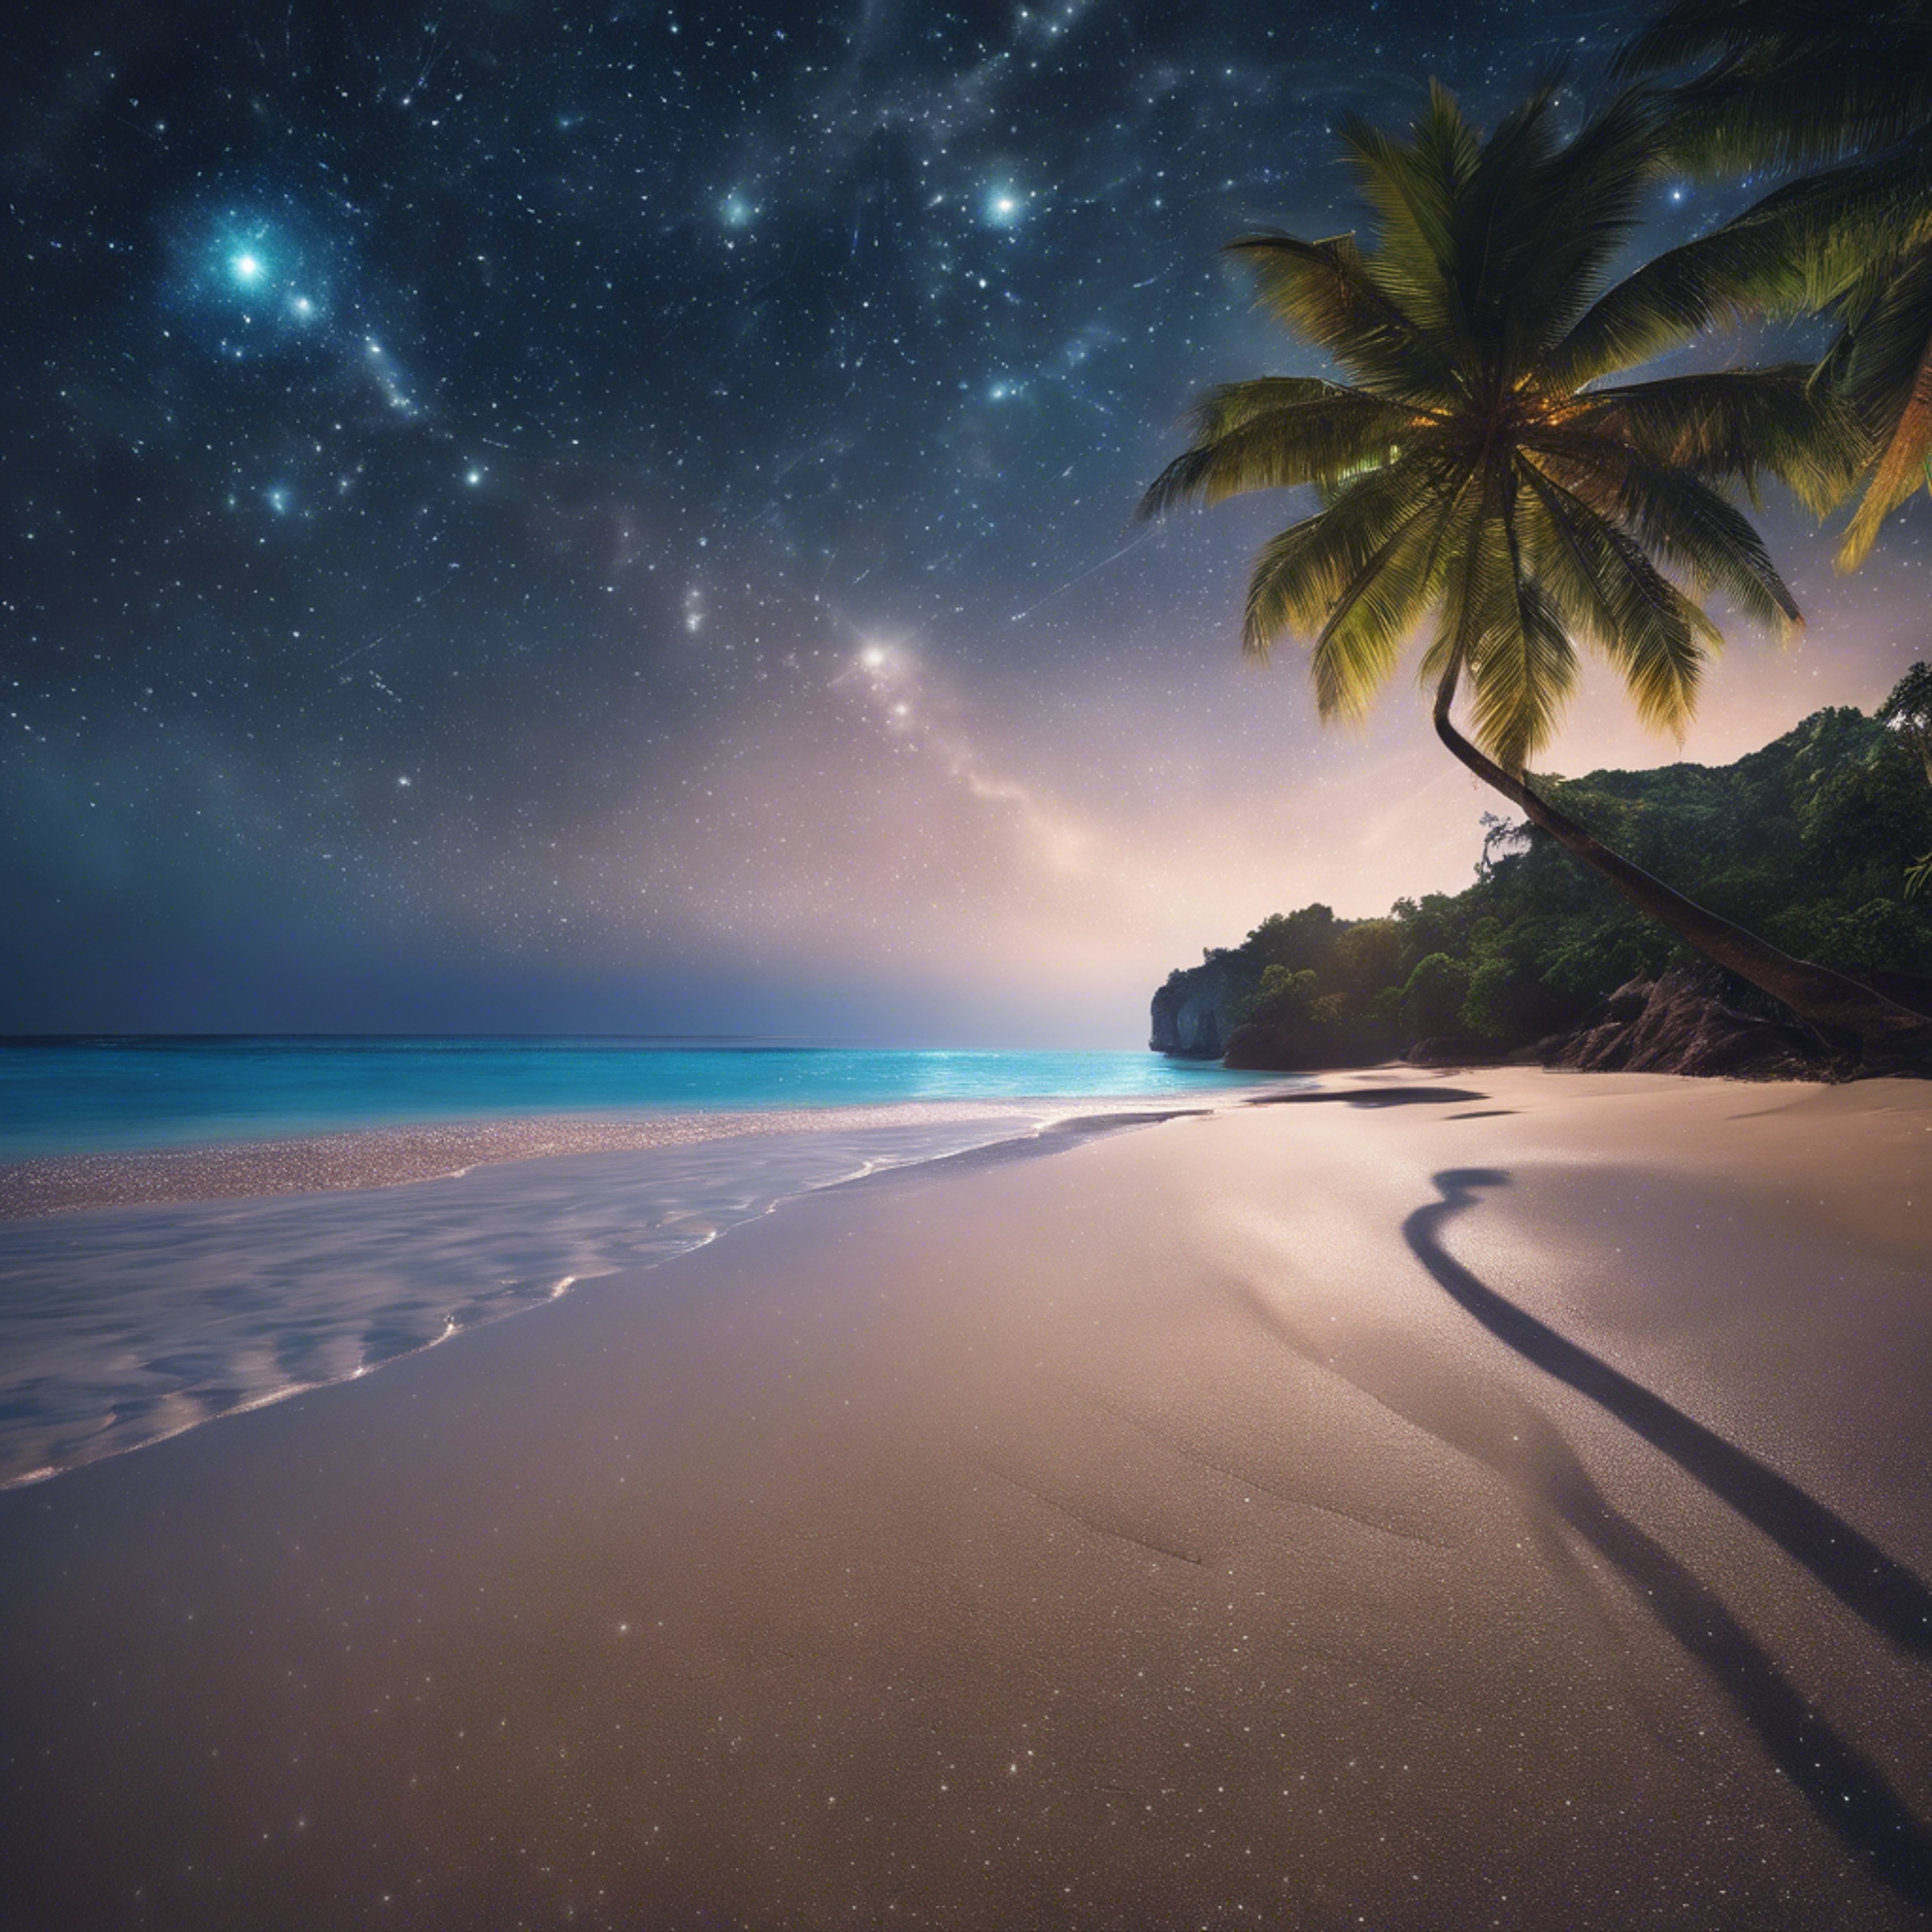 Gleaming stars encrusted in the night sky above a tranquil tropical beach. Hintergrund[e4d213f7e6244d2f8918]